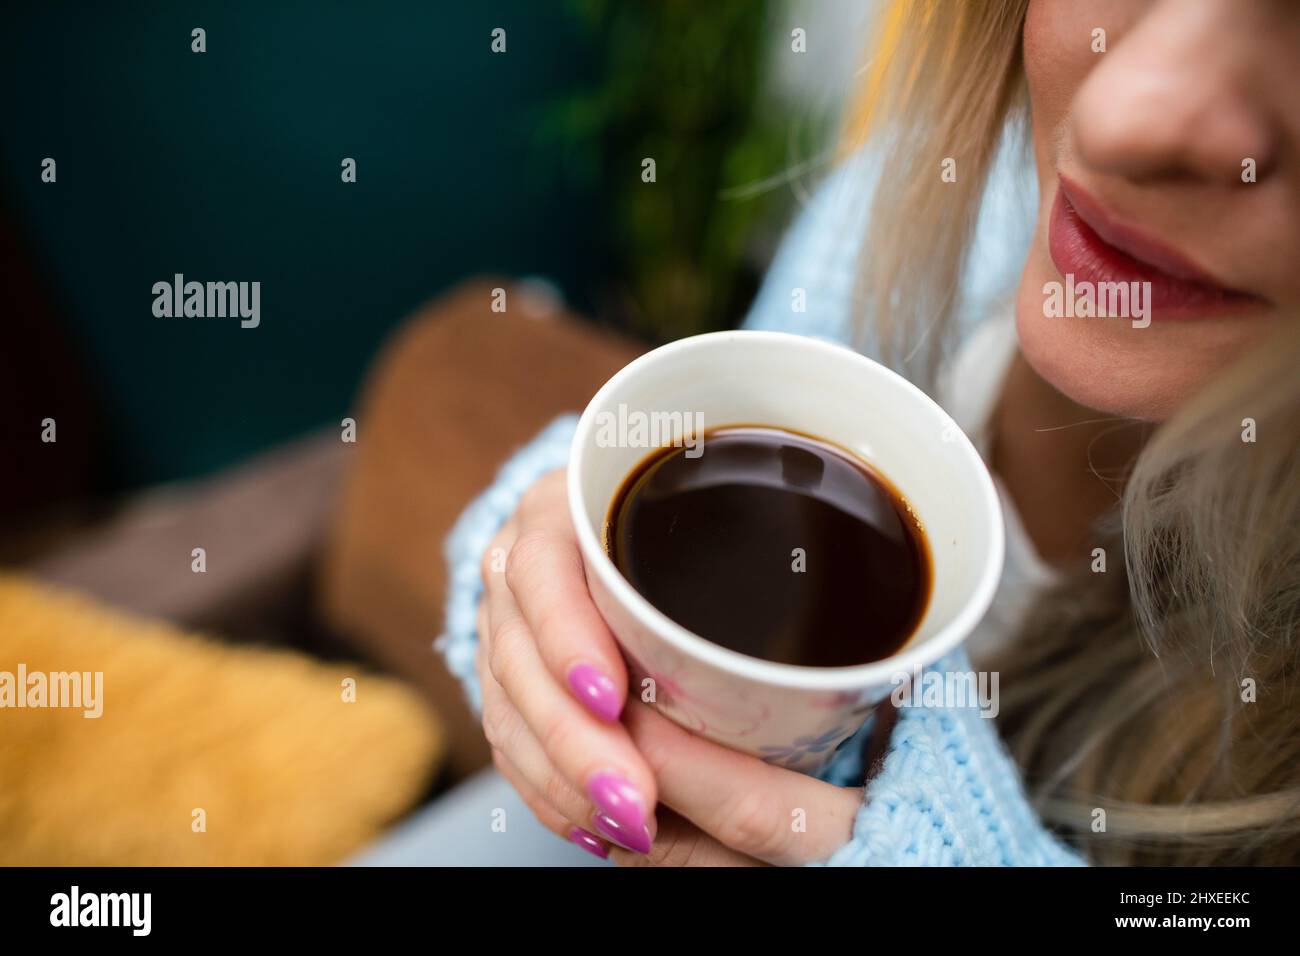 Close-up view of a girl with a mug of coffee in her hands. Stock Photo